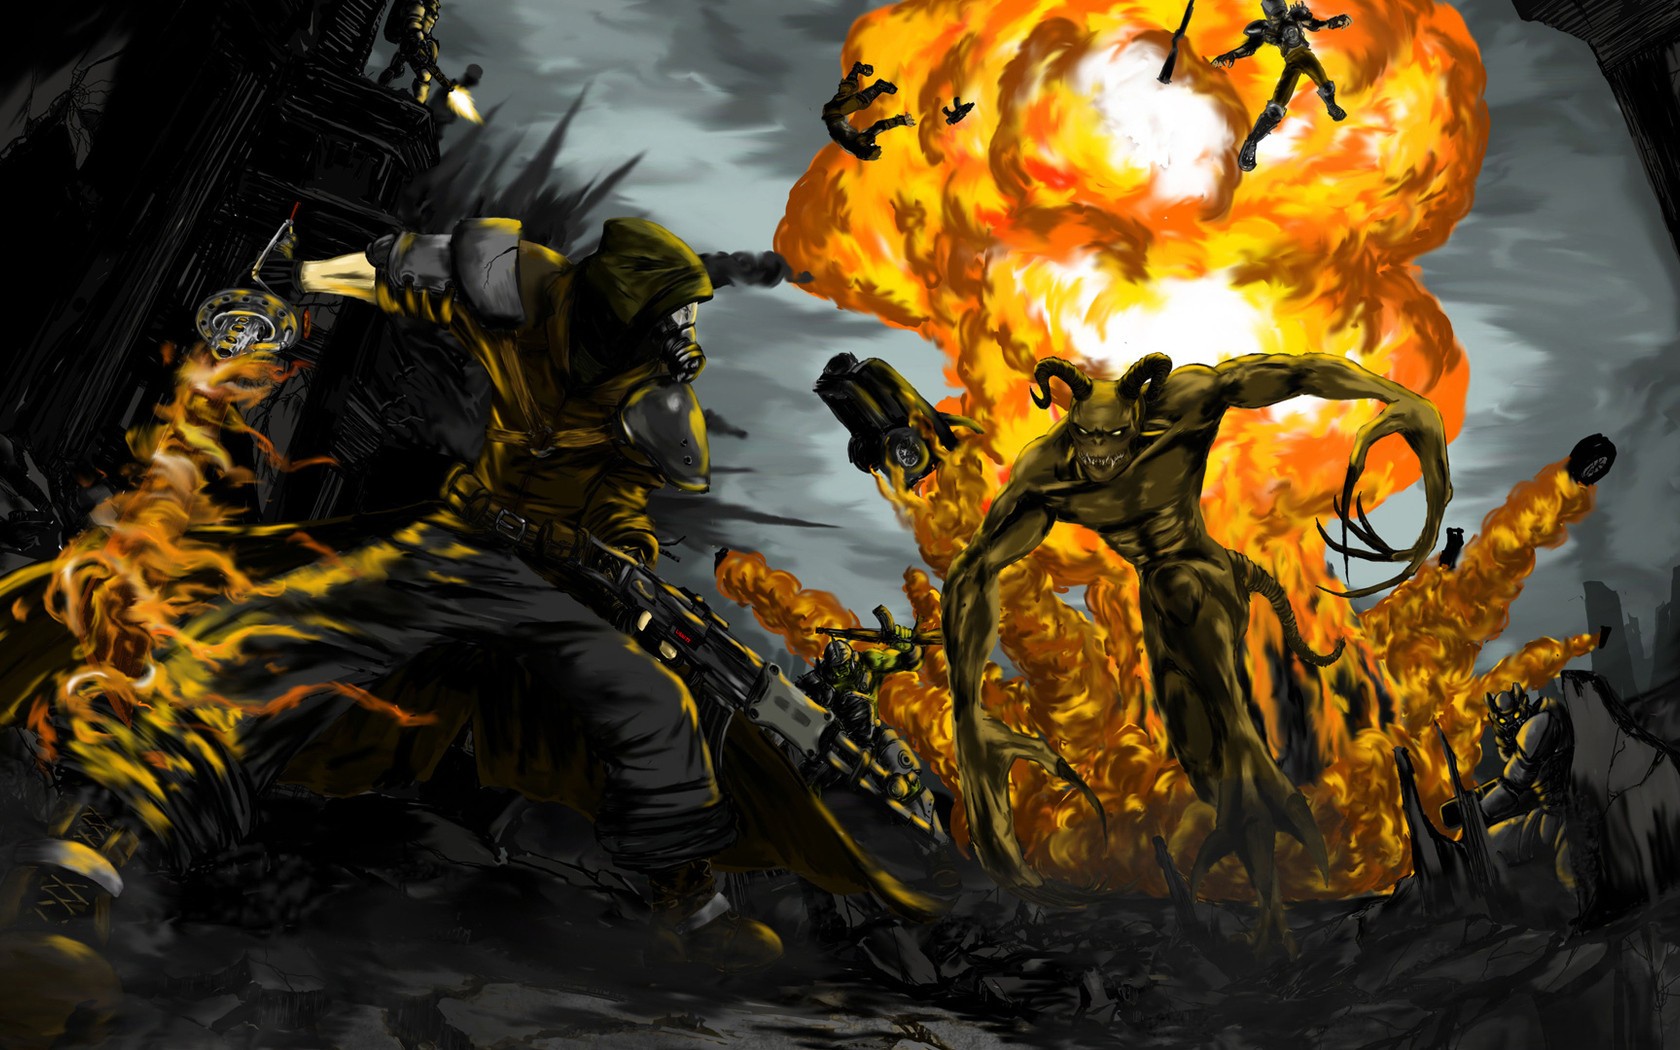 General 1680x1050 Fallout Fallout 3 apocalyptic video games explosion PC gaming video game art